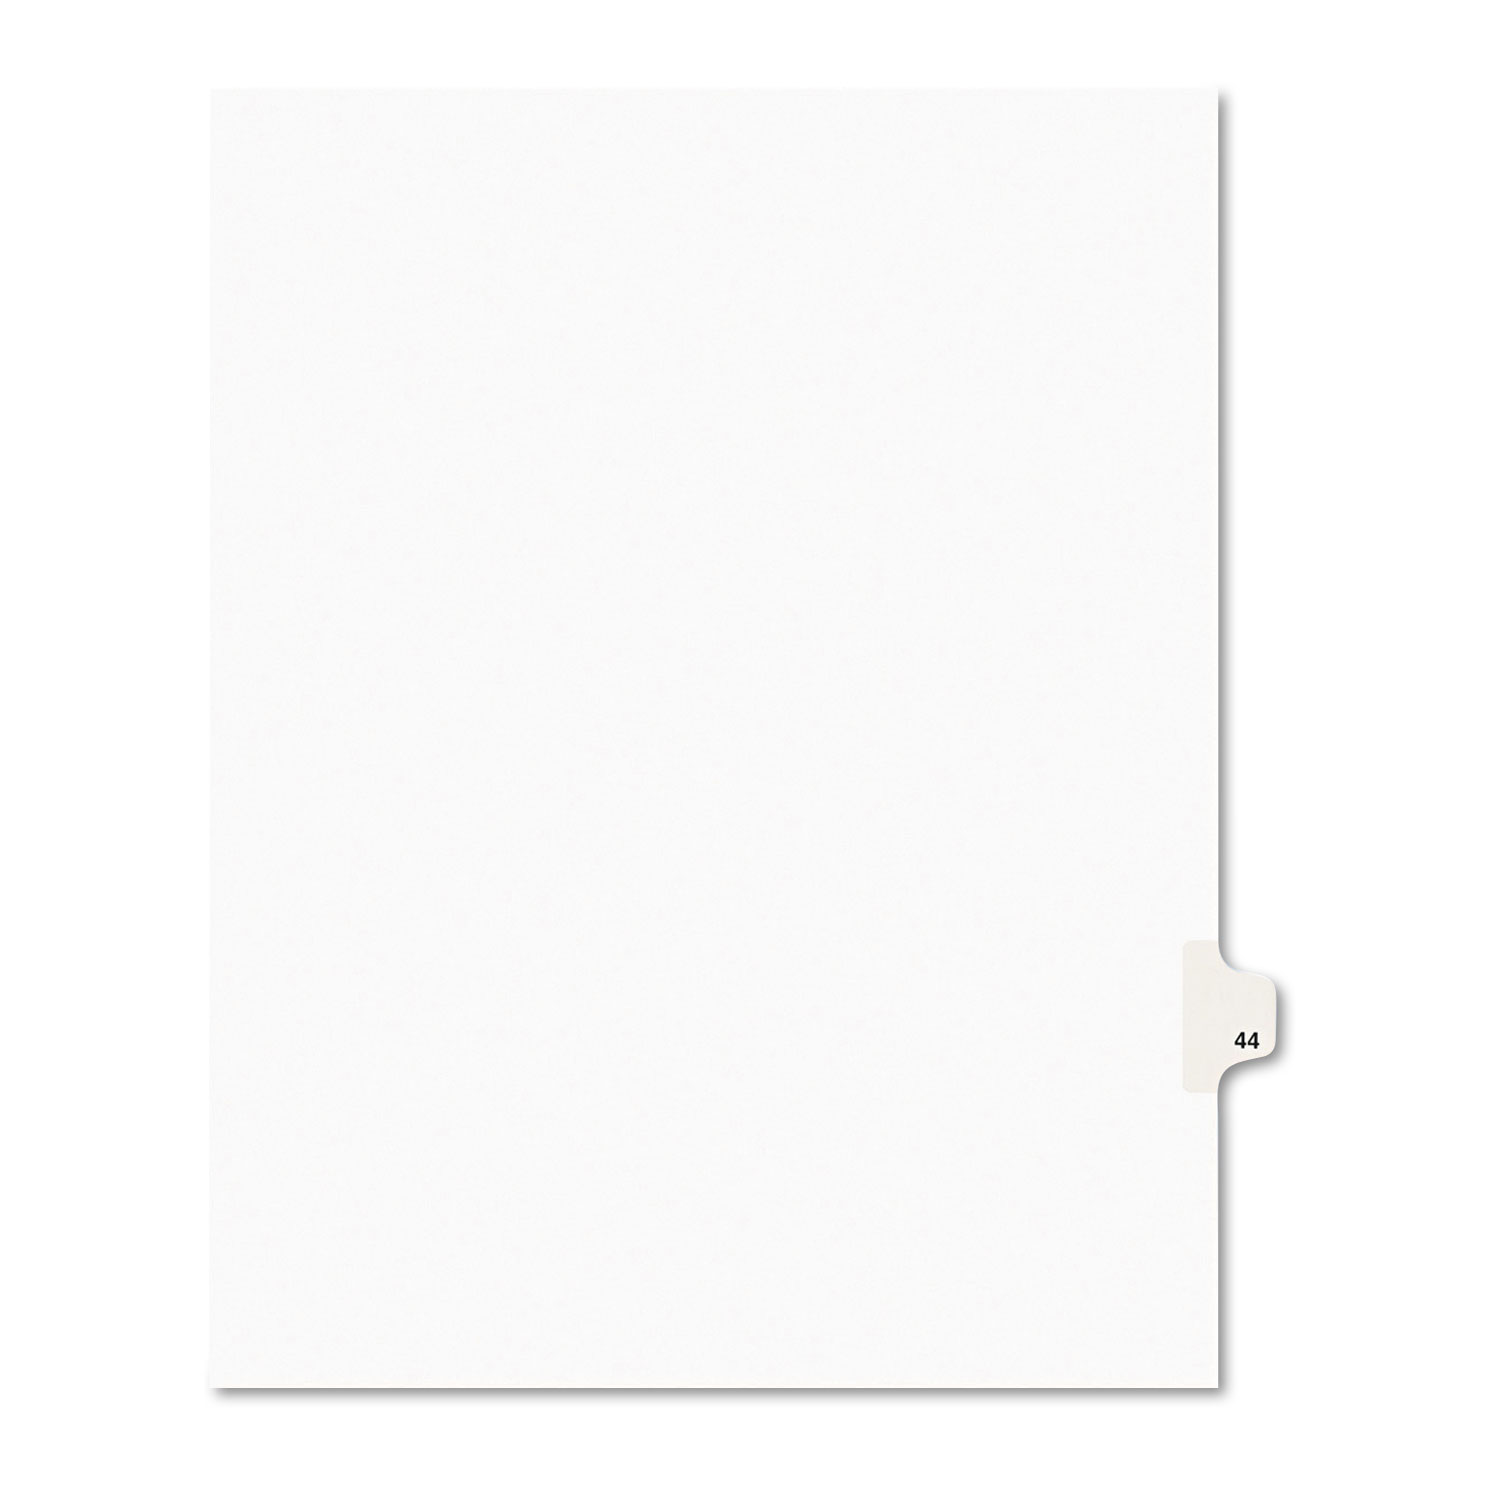  Avery 01044 Preprinted Legal Exhibit Side Tab Index Dividers, Avery Style, 10-Tab, 44, 11 x 8.5, White, 25/Pack (AVE01044) 